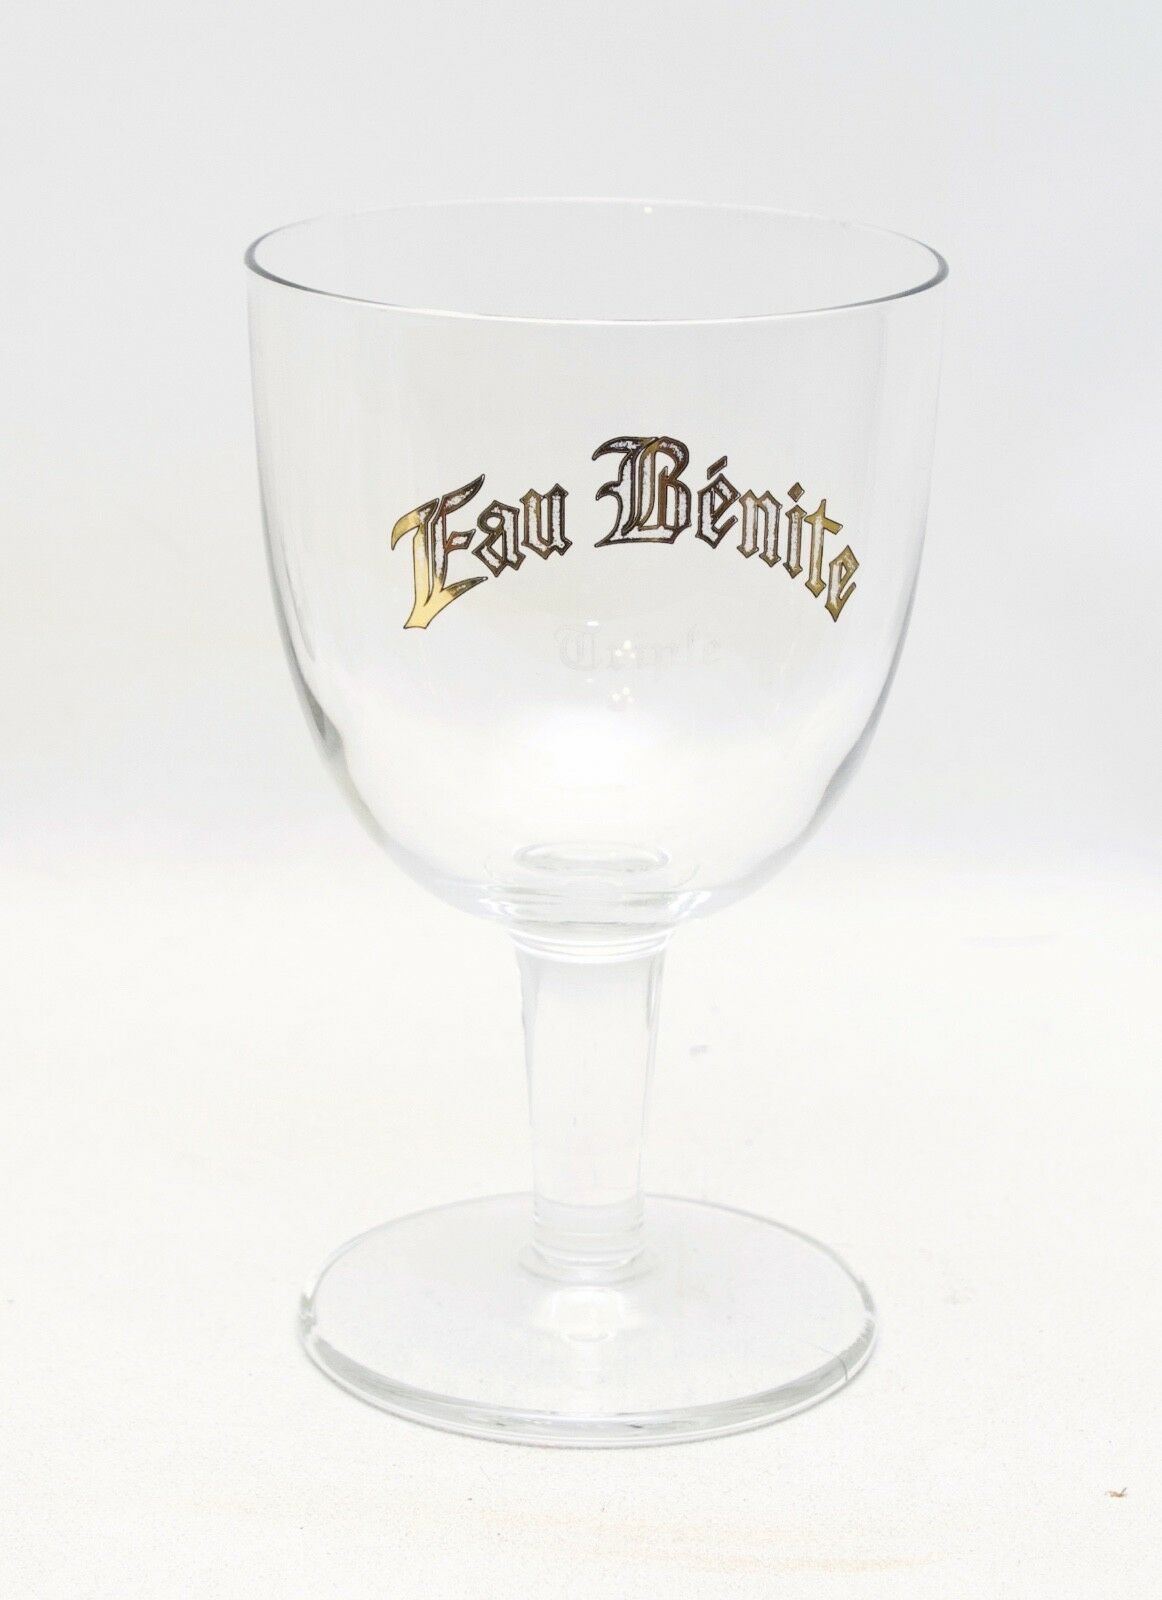 Primary image for Eau Bénite Clear Beer Glass Collectible